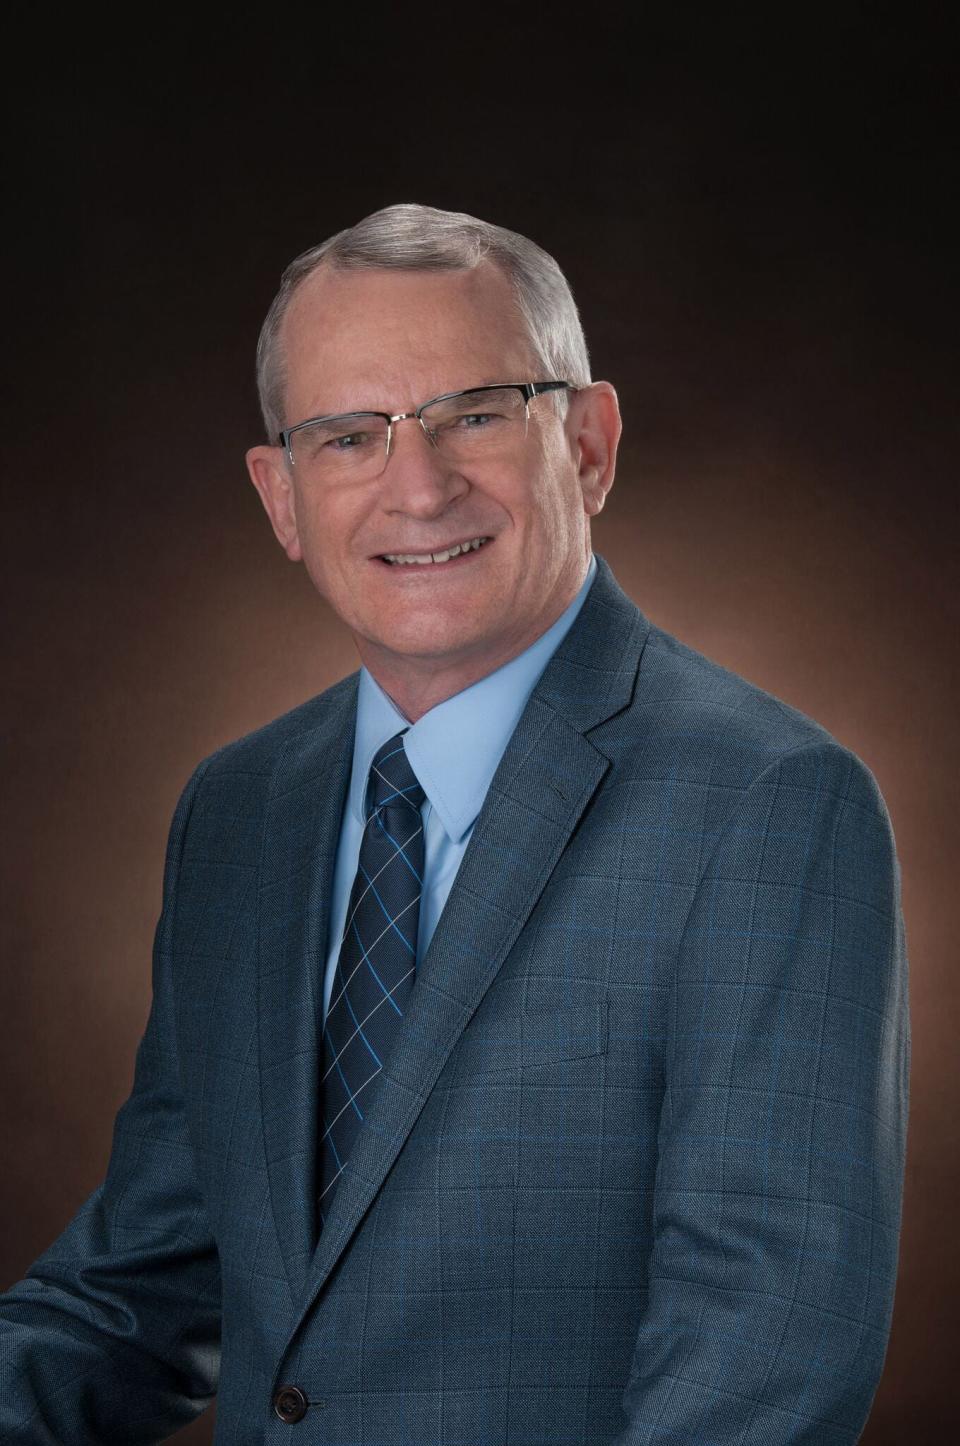 William “Bill” Noonan was appointed to fill out the unexpired term for At-Large Seat 3 on the Sarasota County Public Hospital Board. The term became open in April, when Britt Riner stepped down to focus on advocating for parents and children on a statewide level.